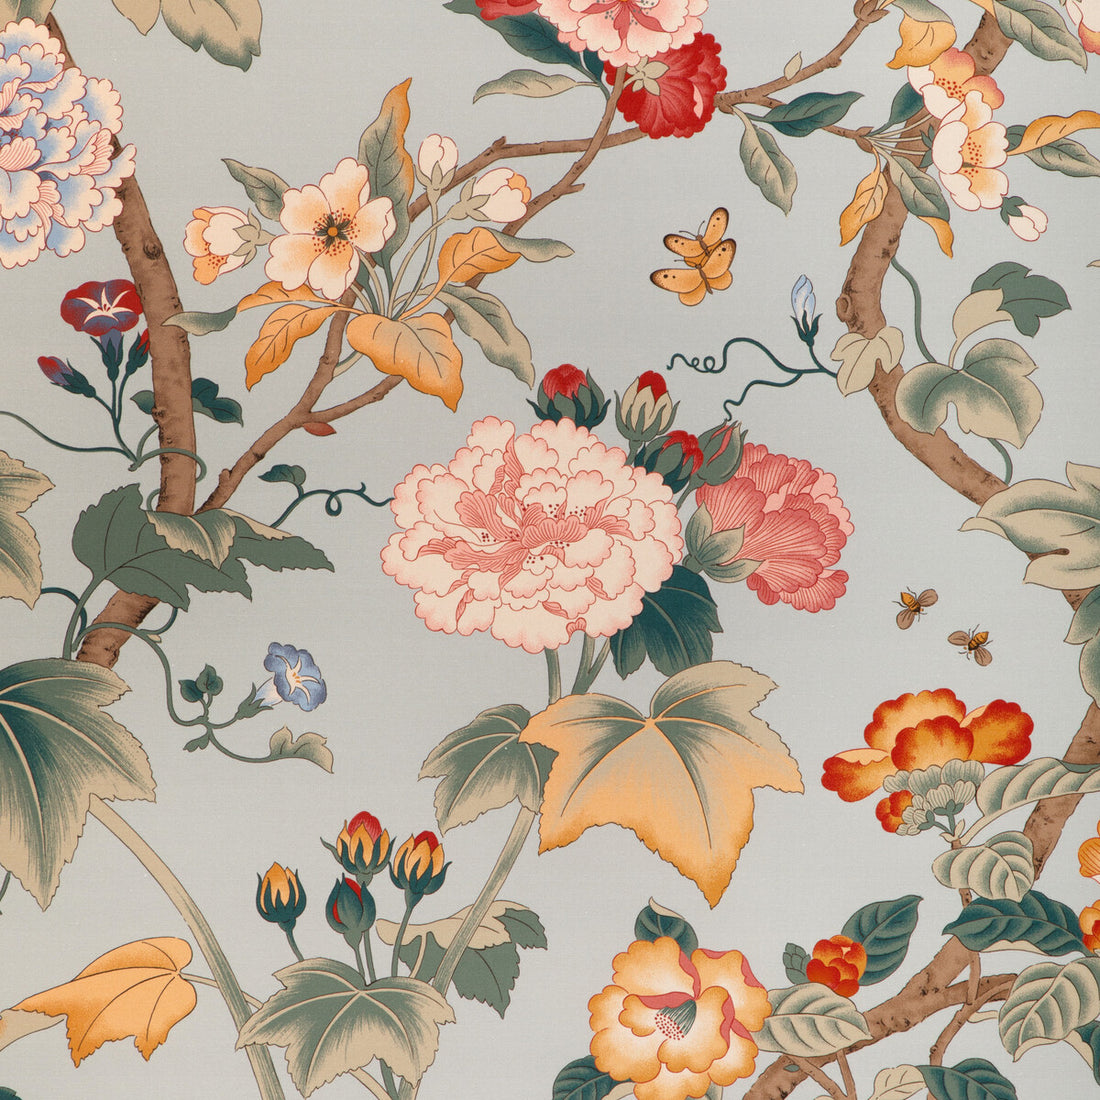 Gardenia Print fabric in antique color - pattern 2023143.137.0 - by Lee Jofa in the Garden Walk collection